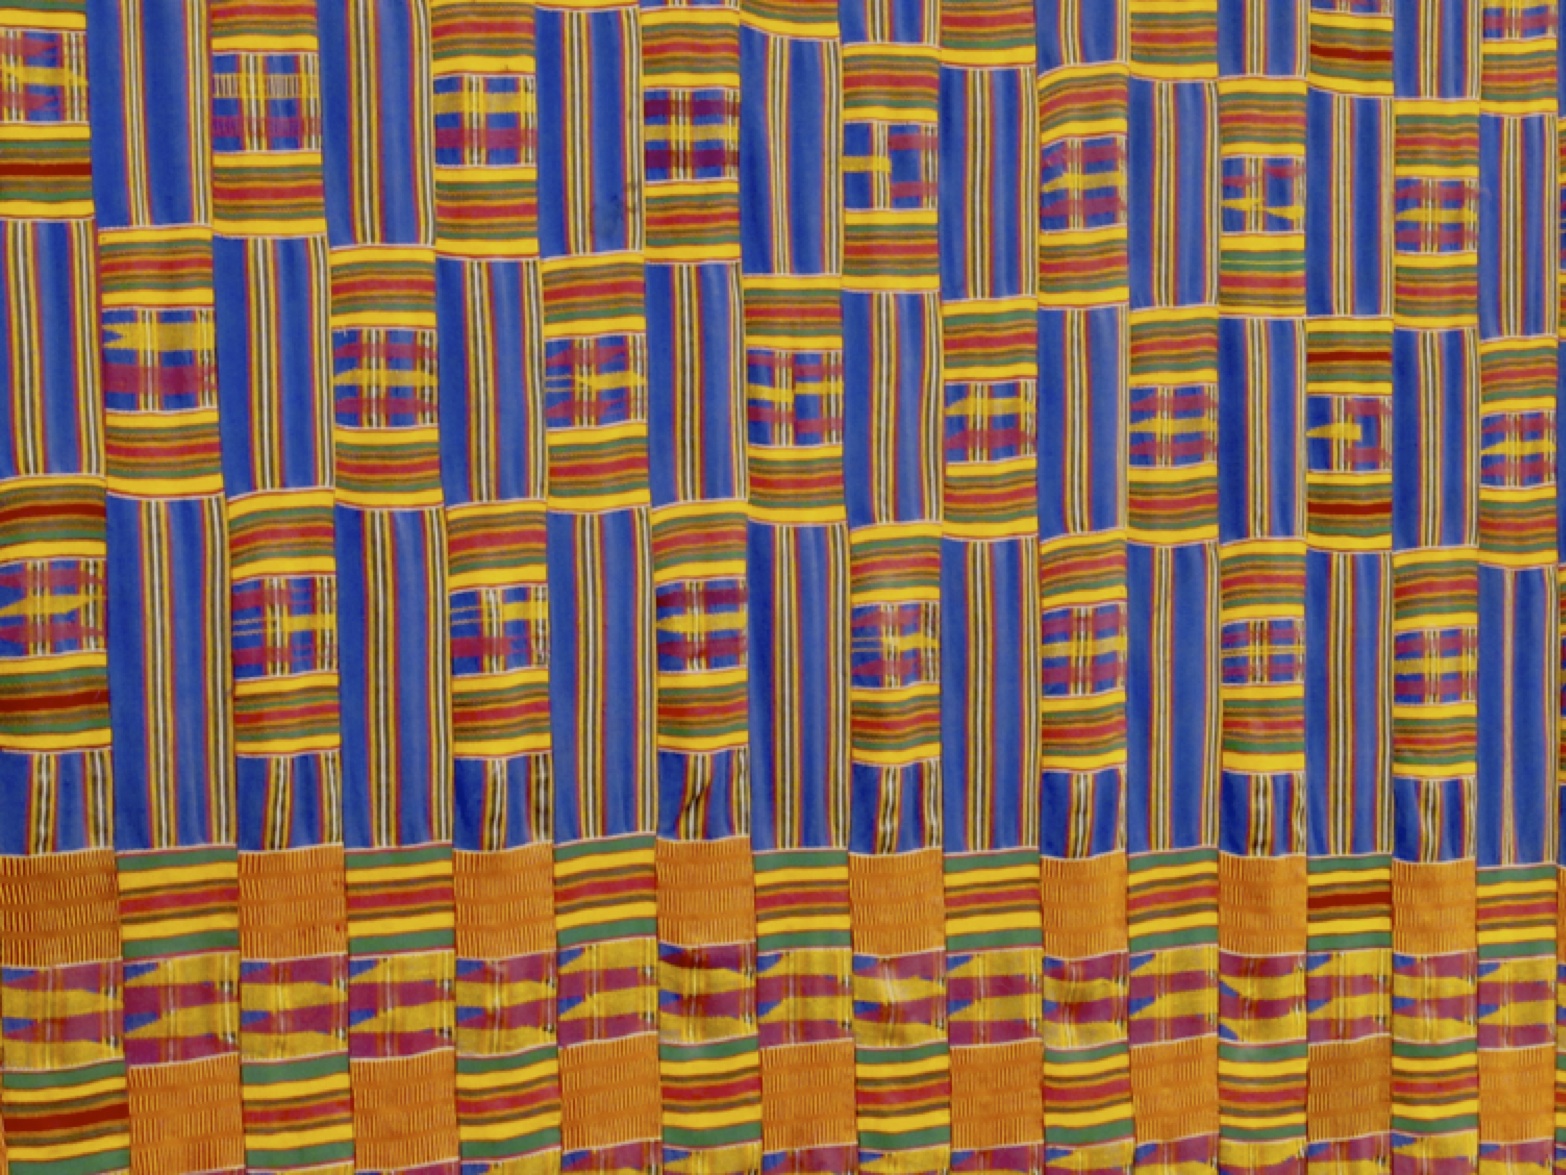 Figure 1: Detail of Kente cloth hanging in the Harold Washington Library Center, Chicago